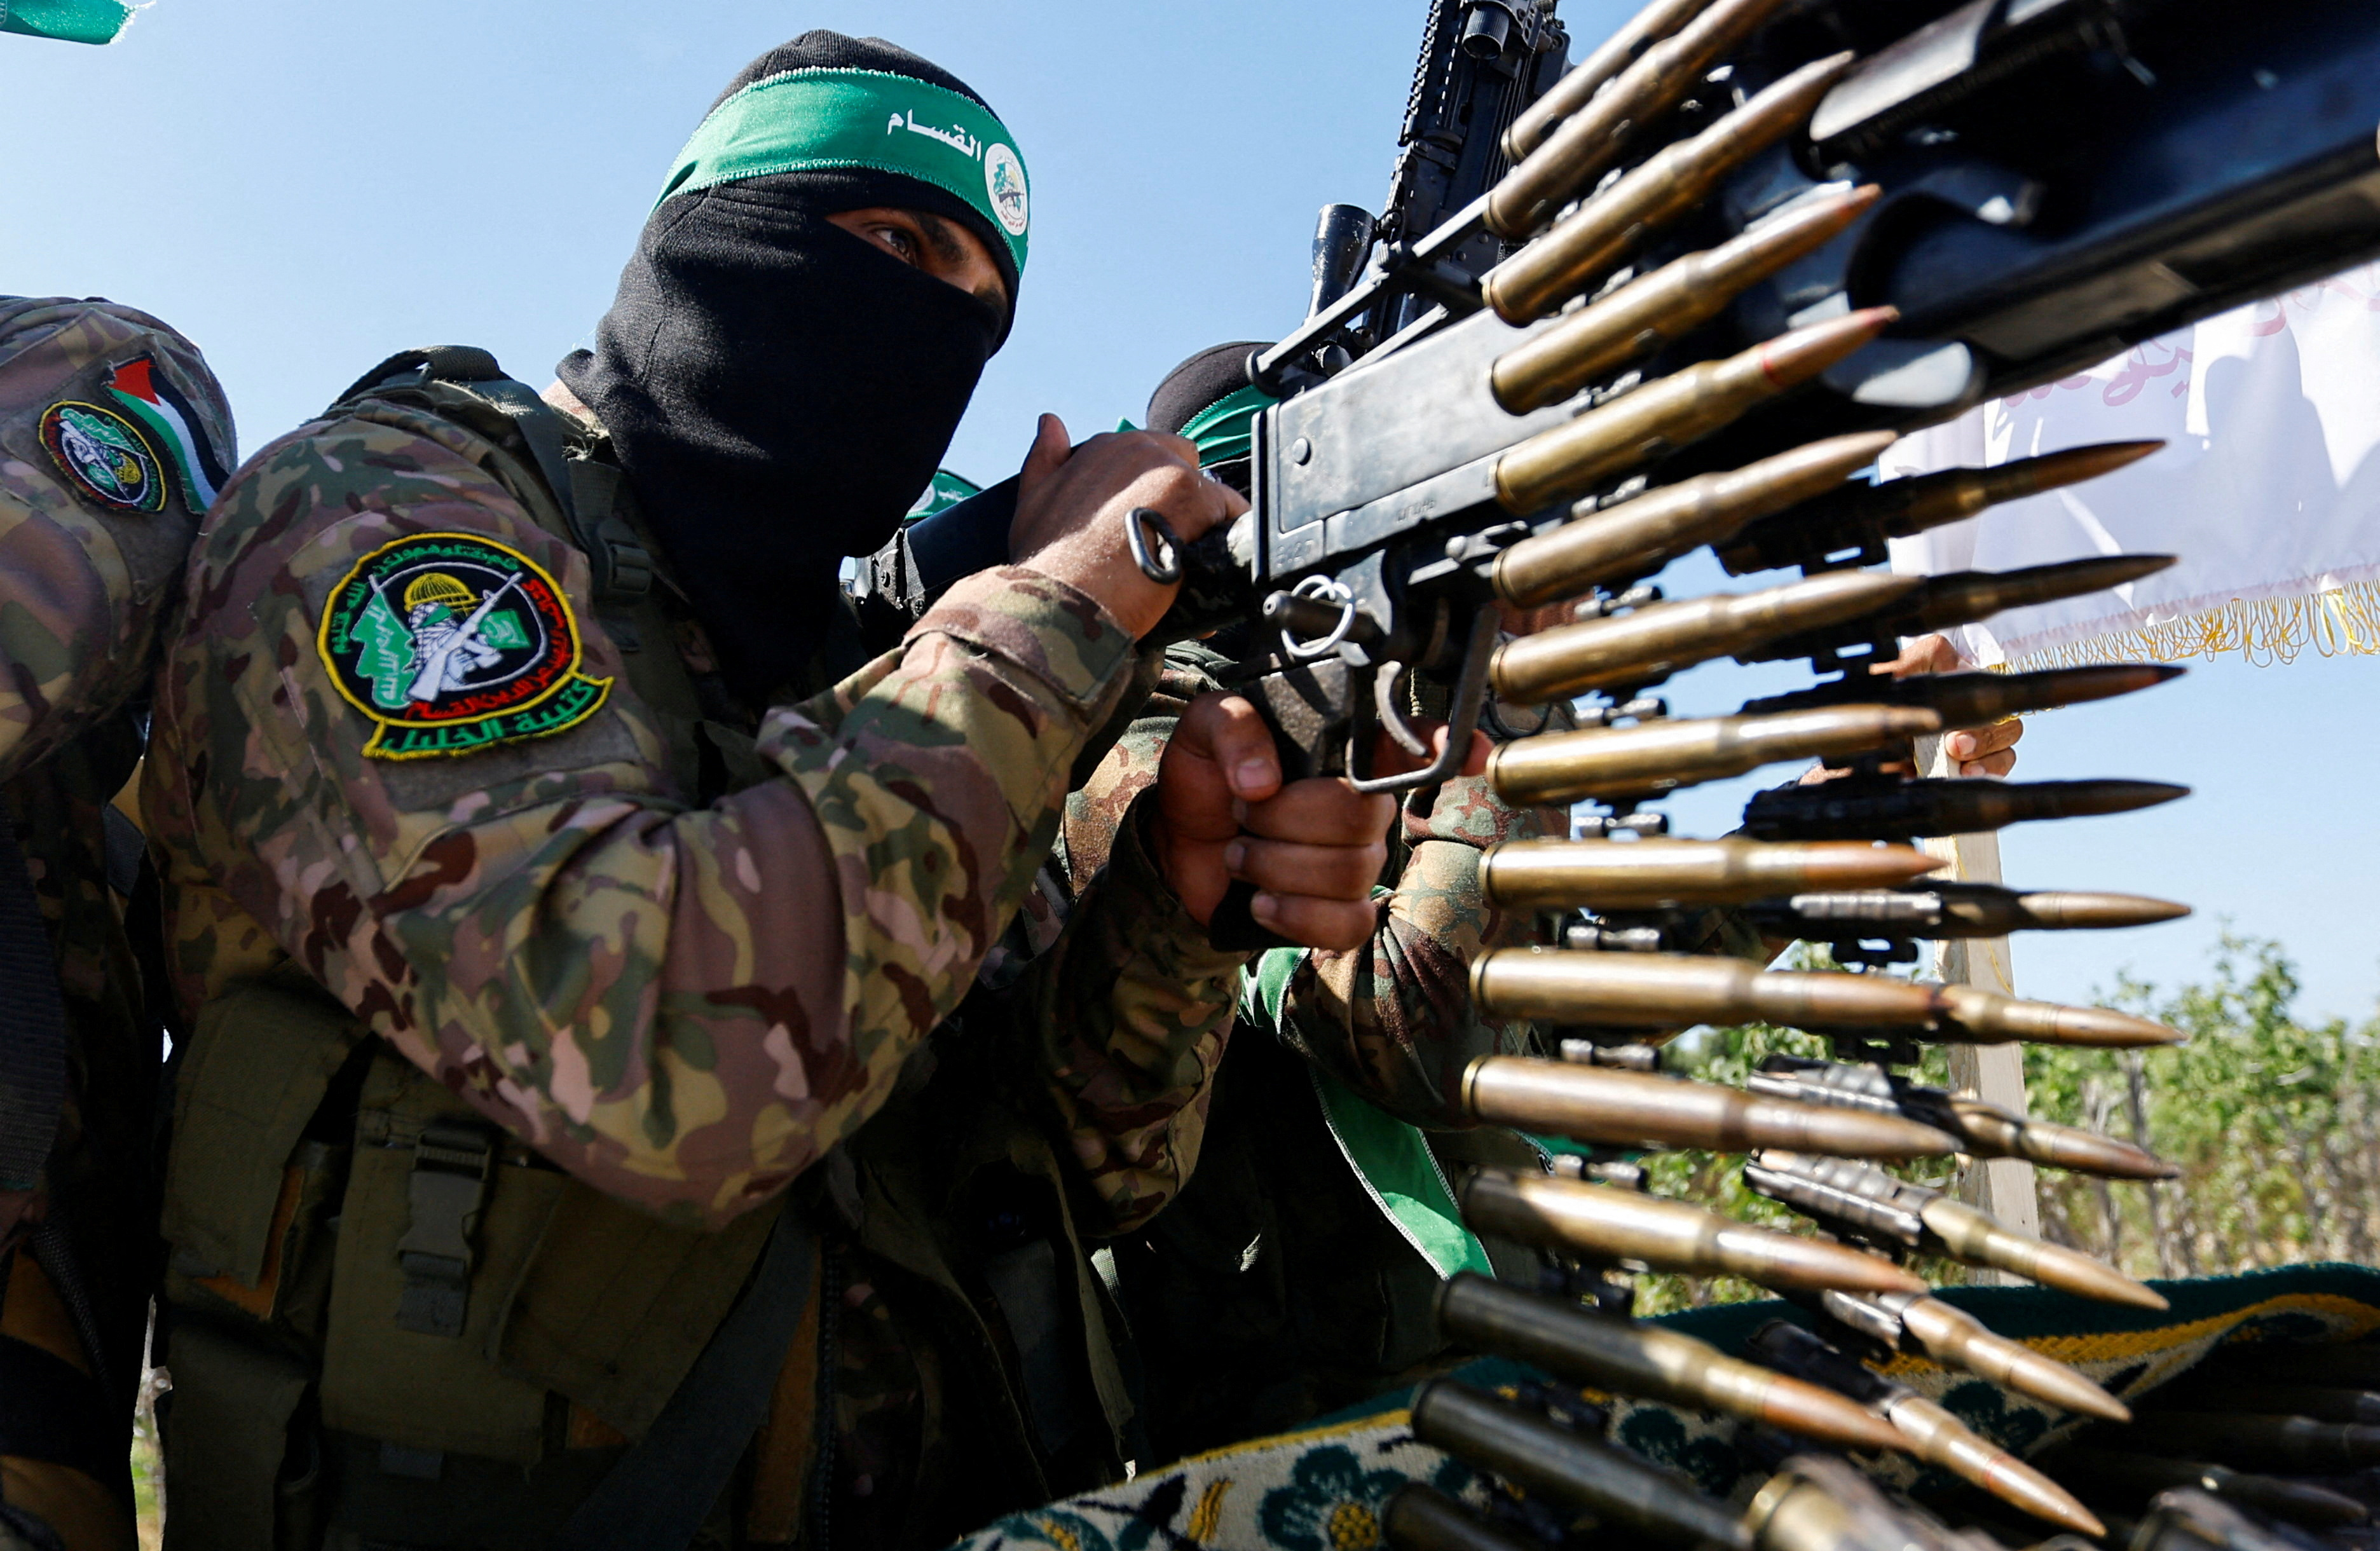 Hamas fighters engaged in intense combat against Israel.